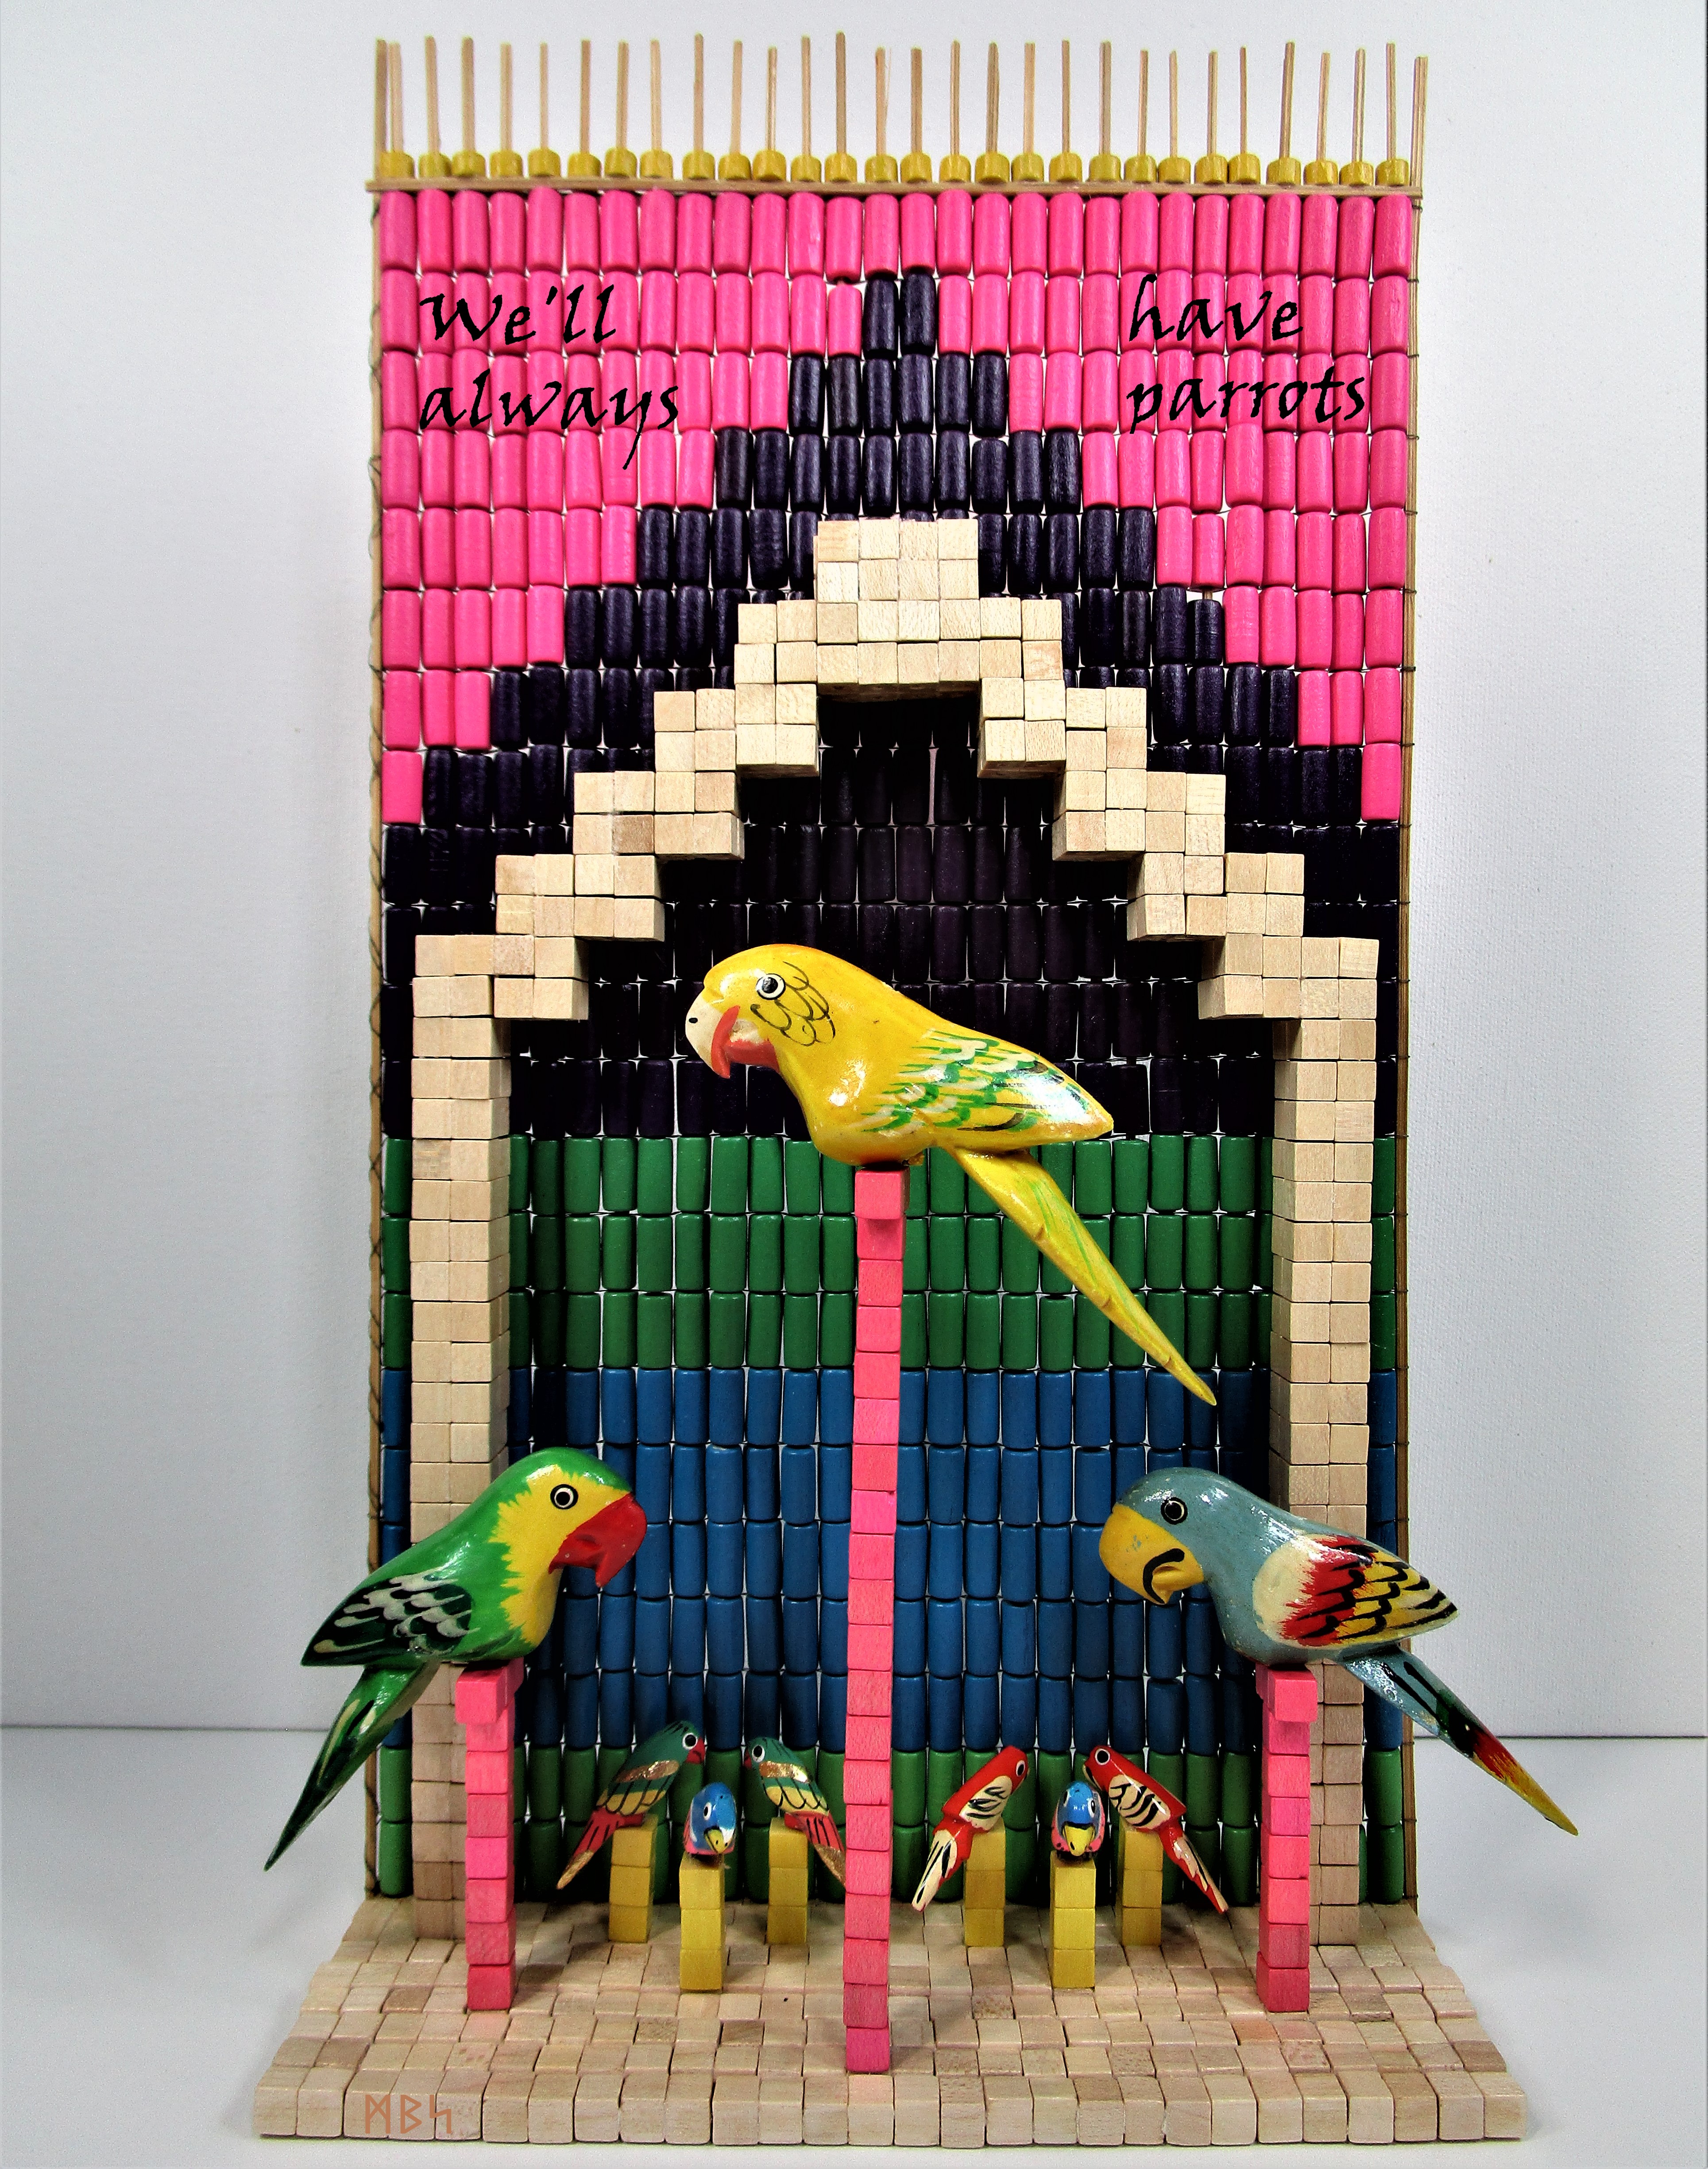 "We'll always have parrots": a diorama by Mike Smetzer.